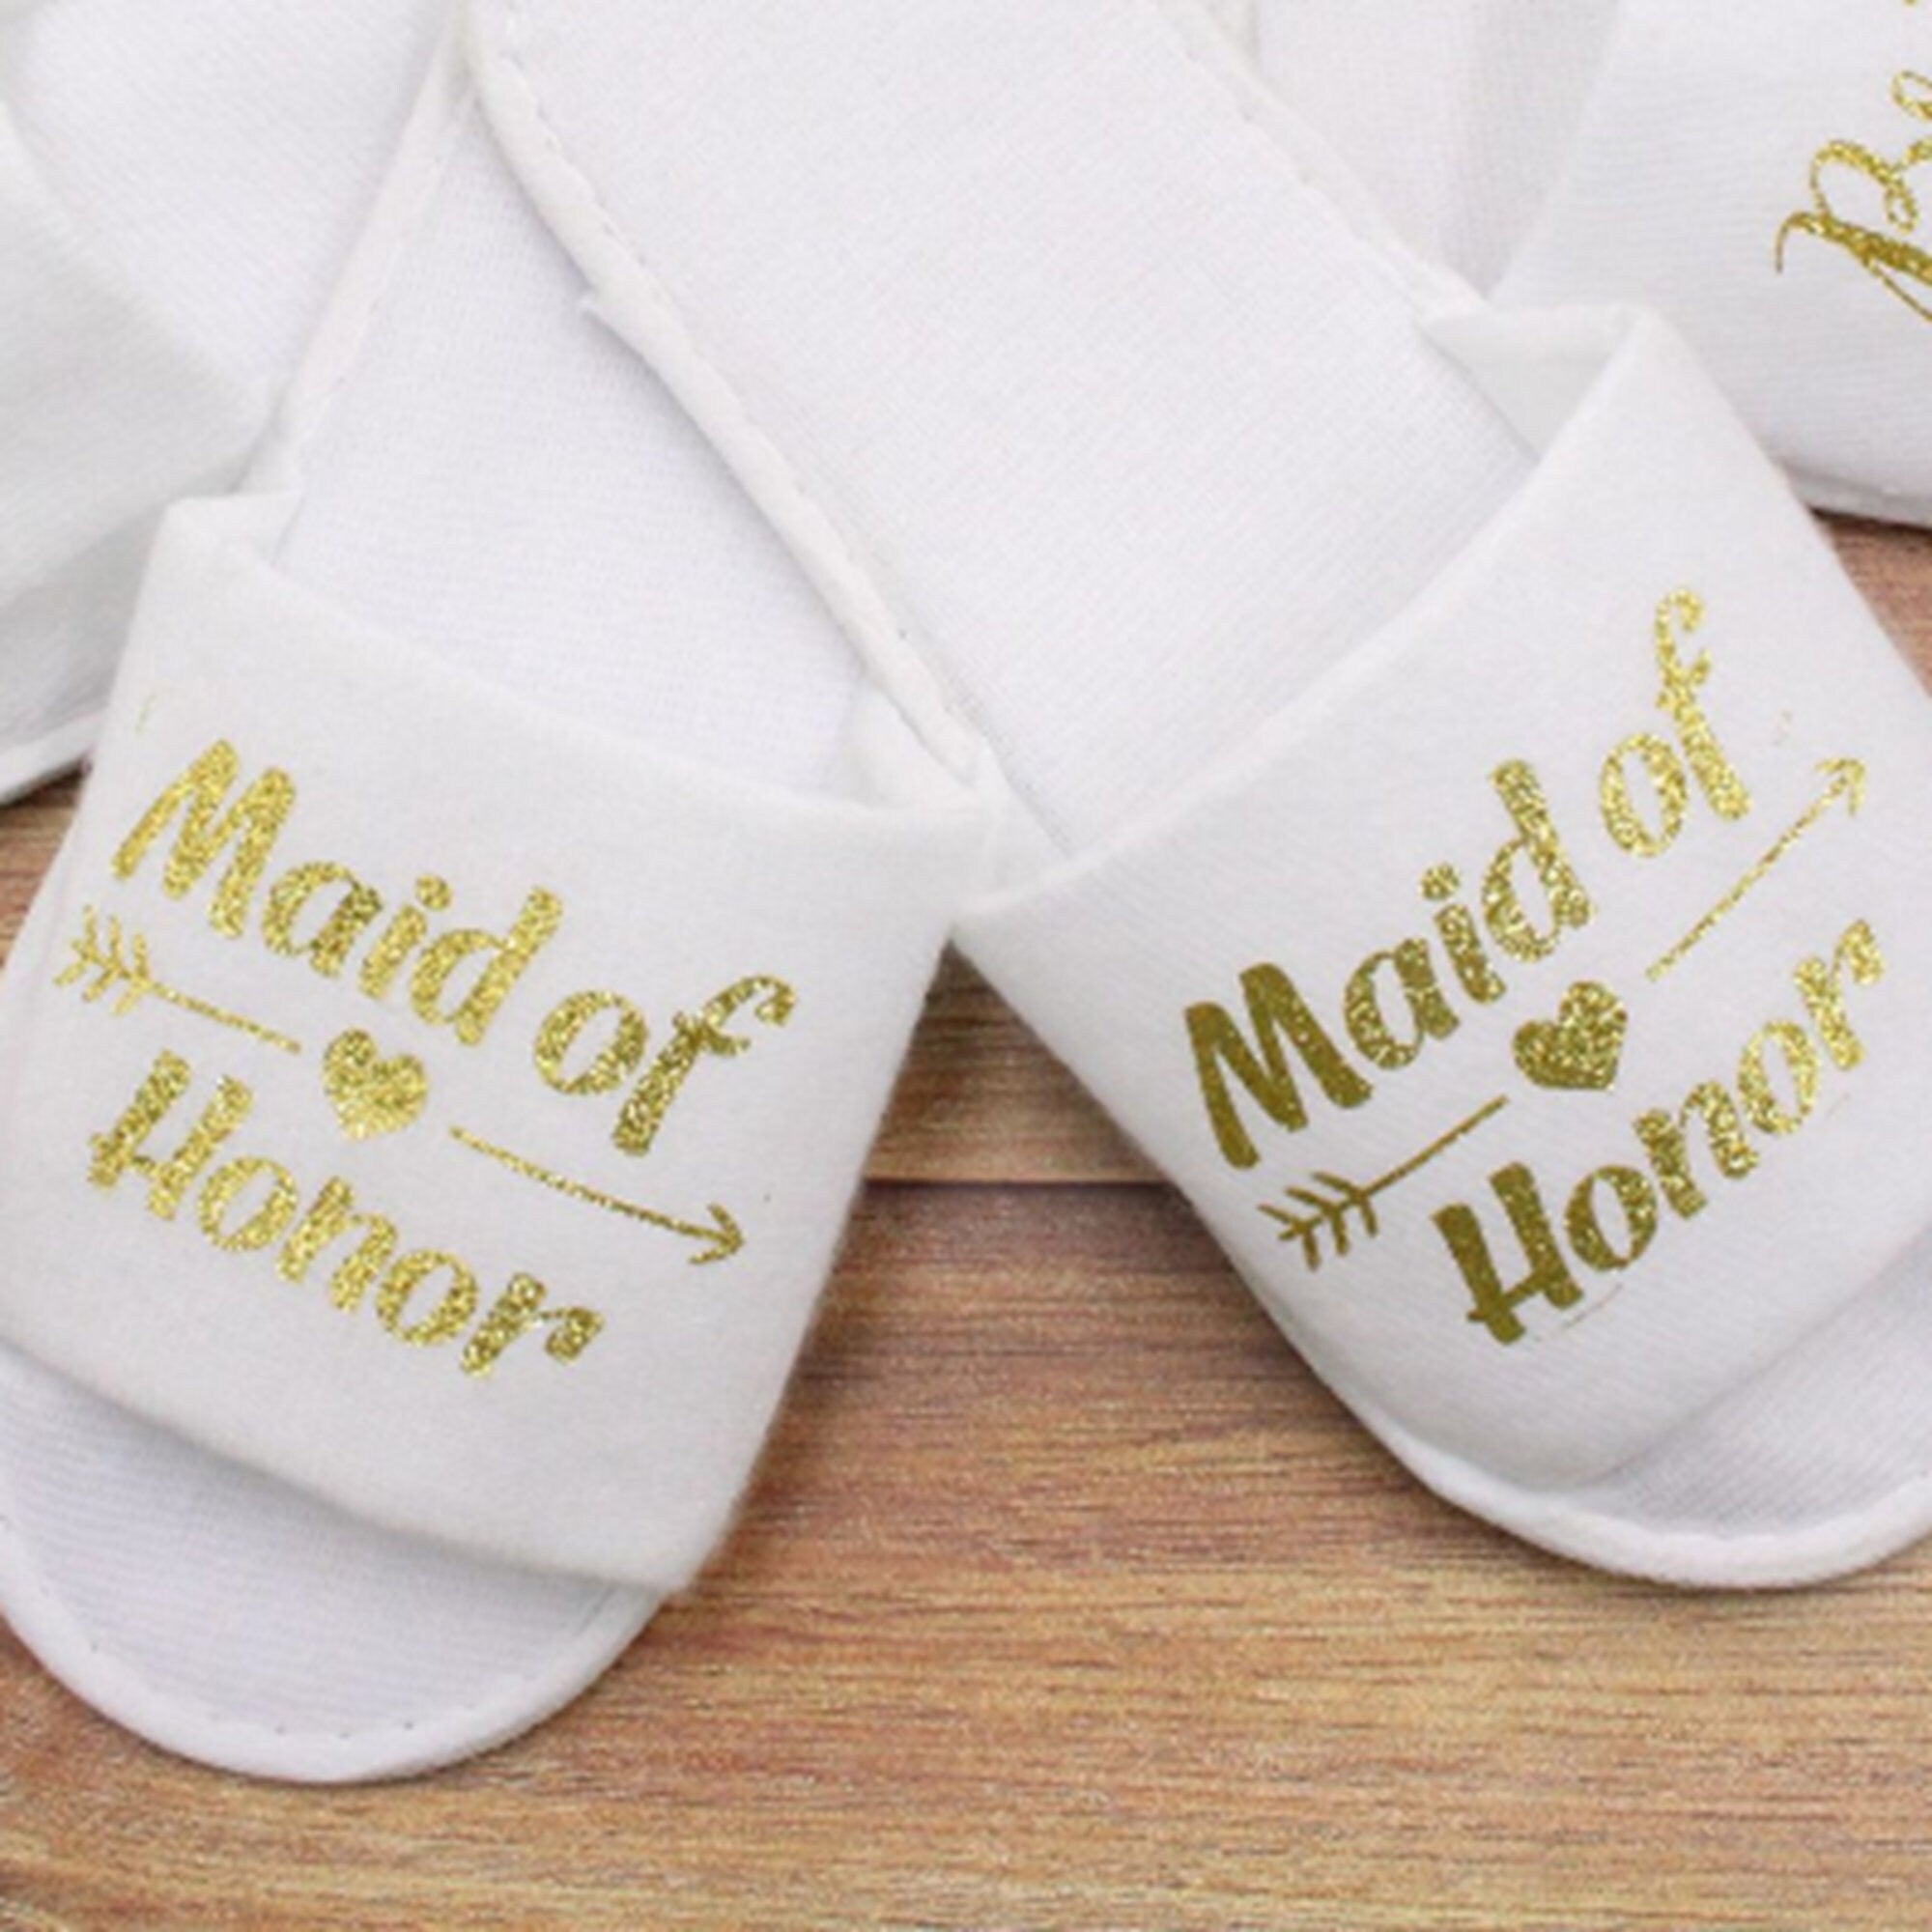 Bridal Slippers Gold on White Bride To Be Bridesmaid Maid of Honor Wedding Hens Night